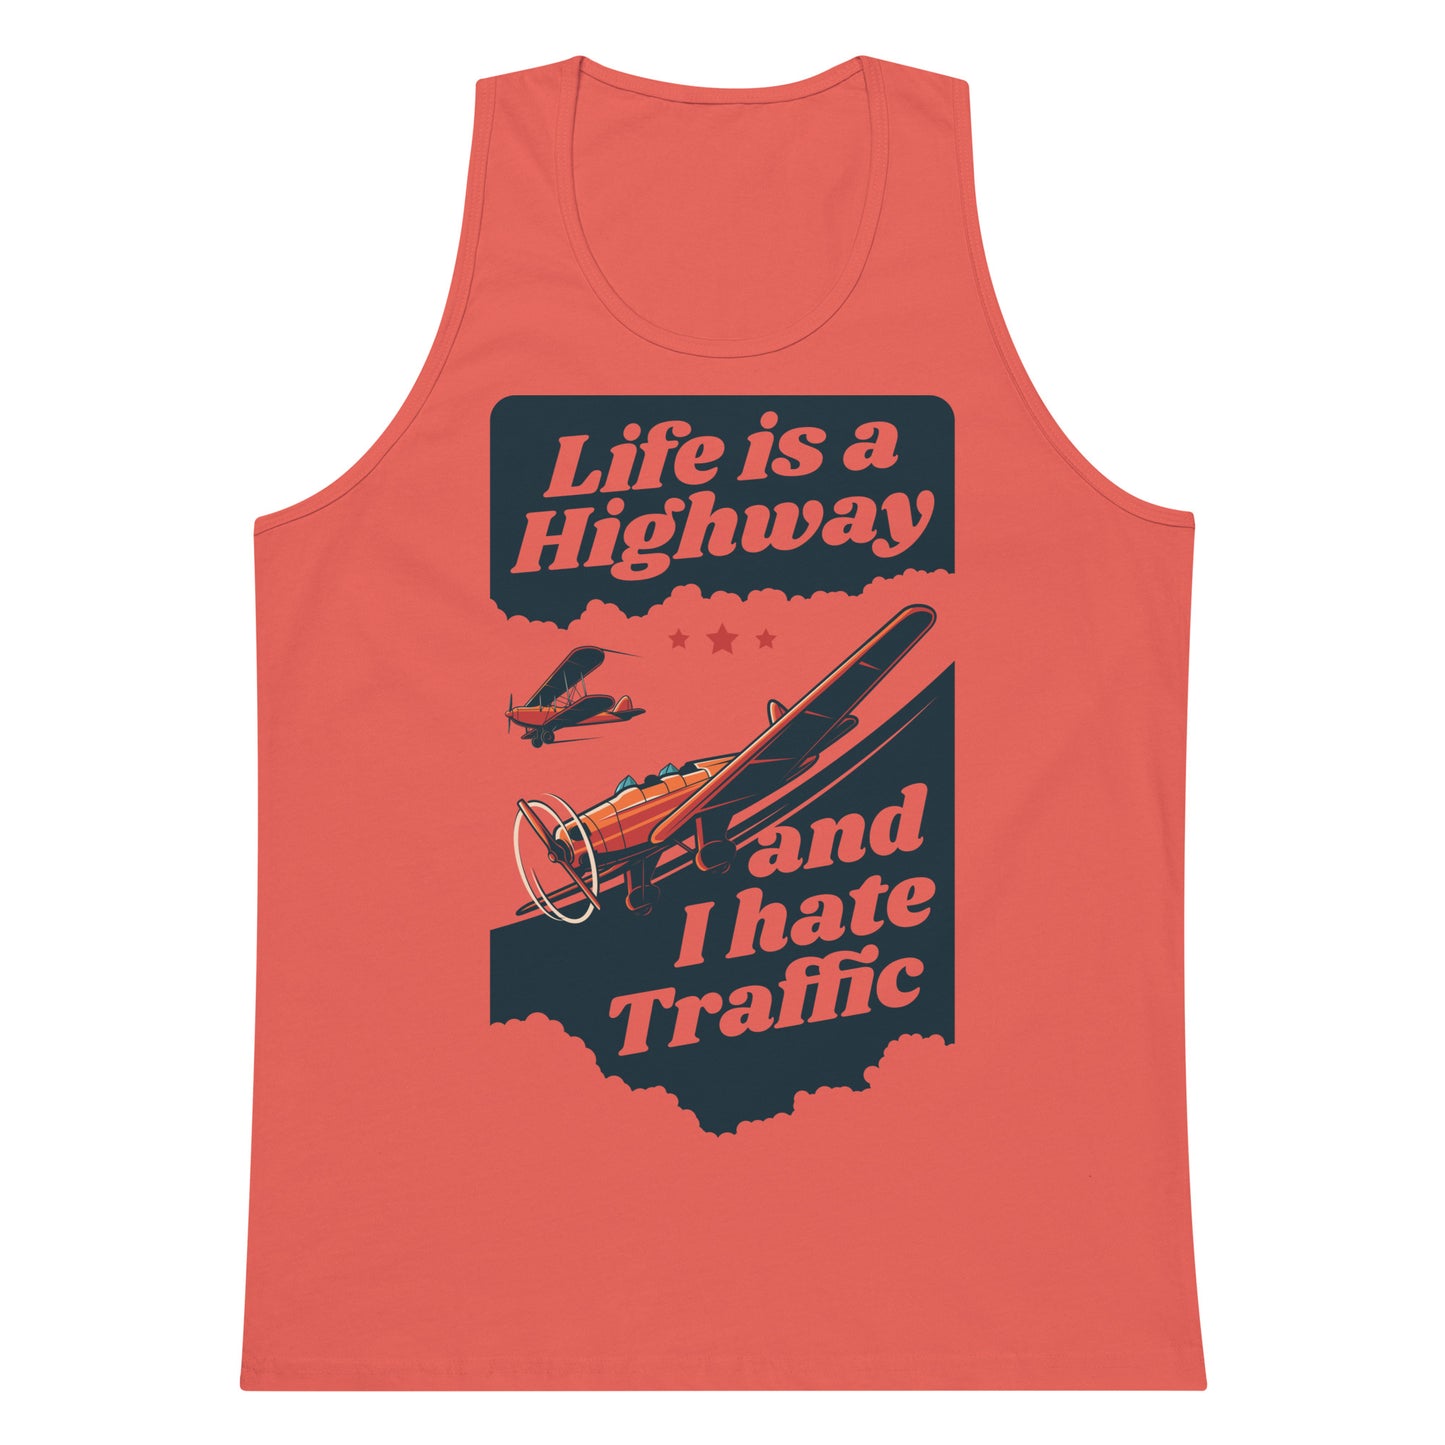 Life is a Highway and I Hate Traffic tank top